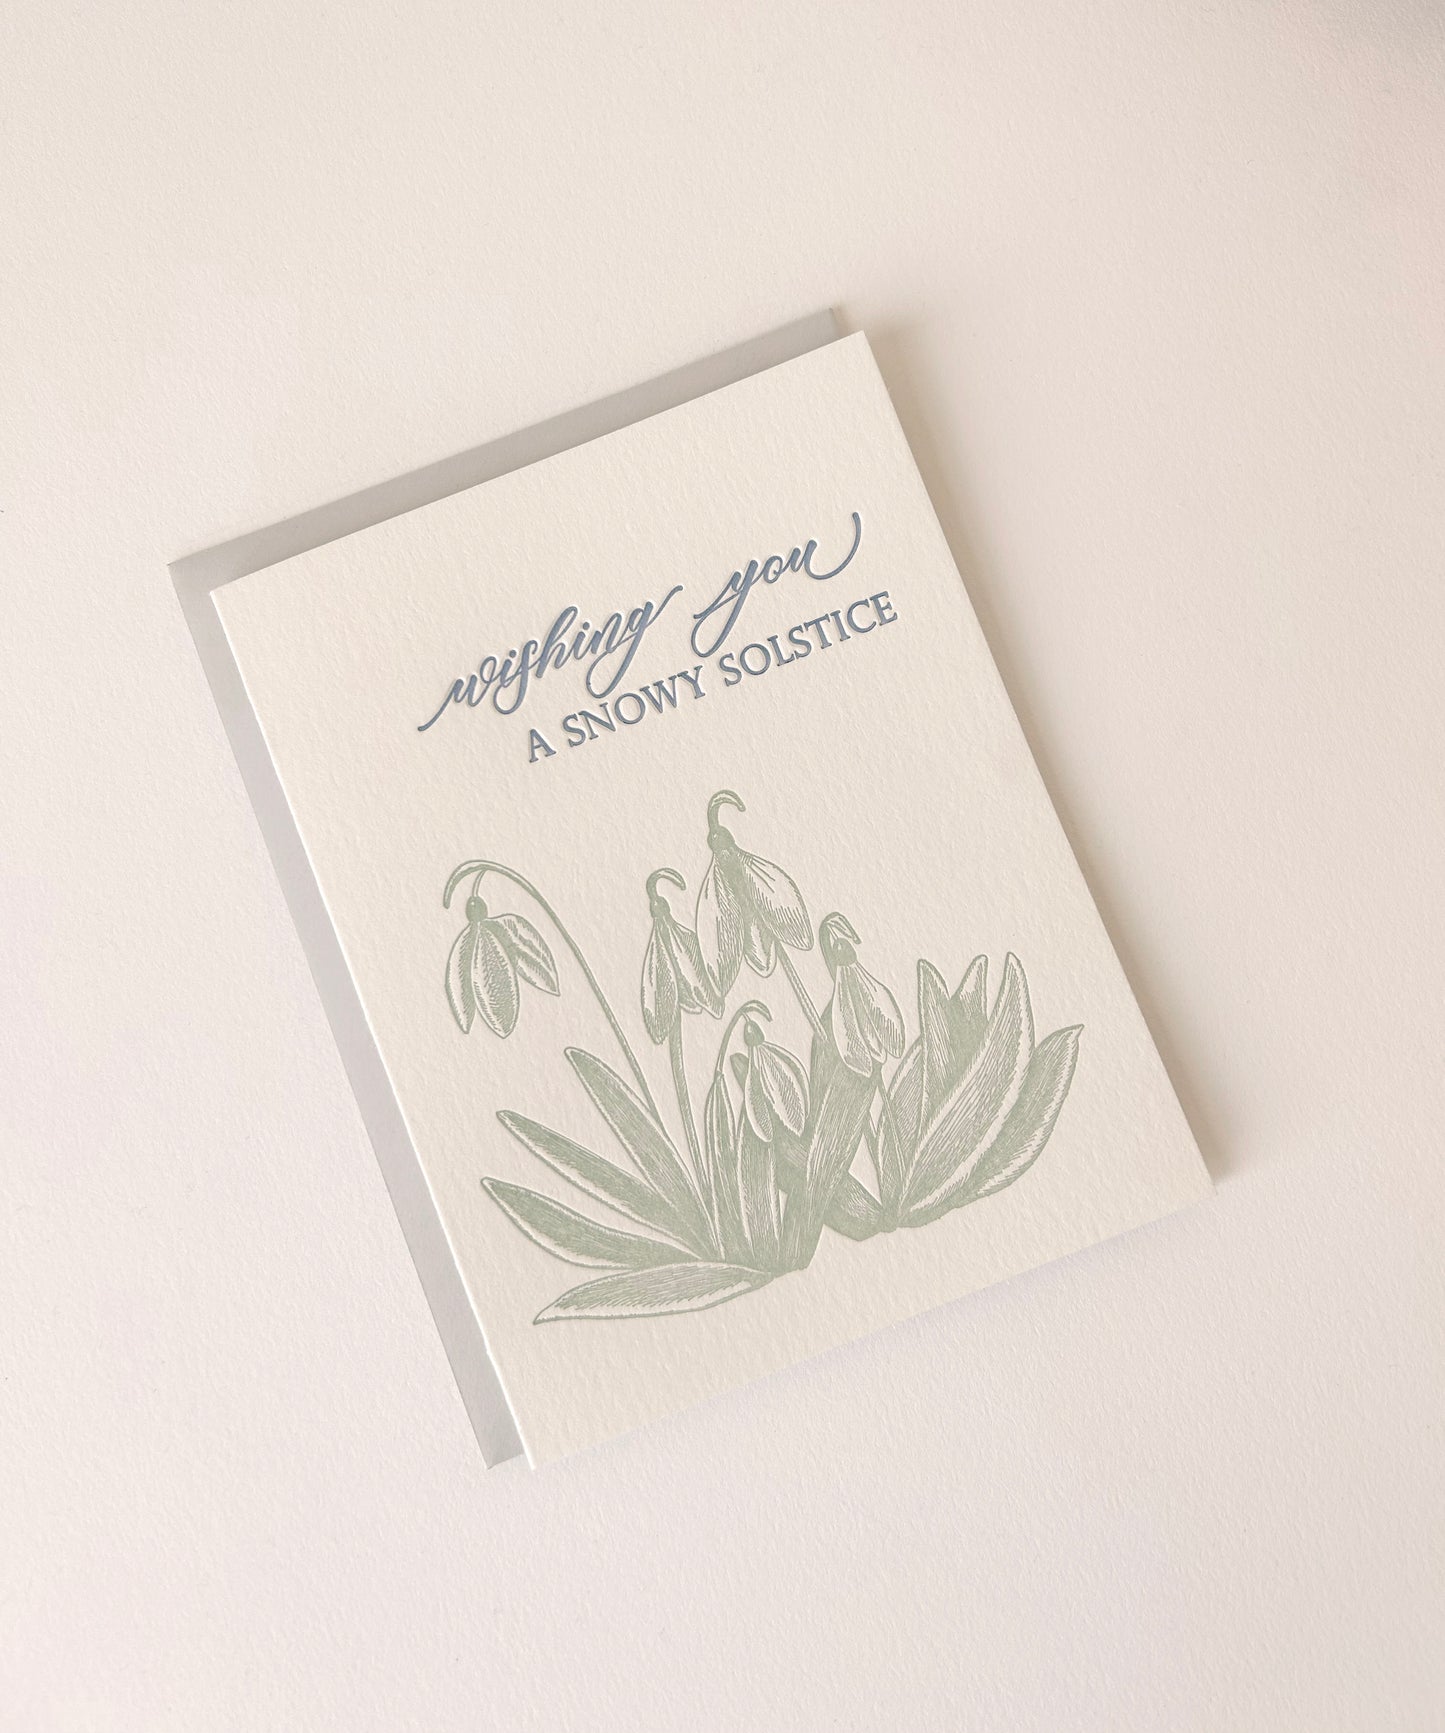 Letterpress holiday card with snowdrop flowers that says "Wishing You A Snowy Solstice" by Rust Belt Love